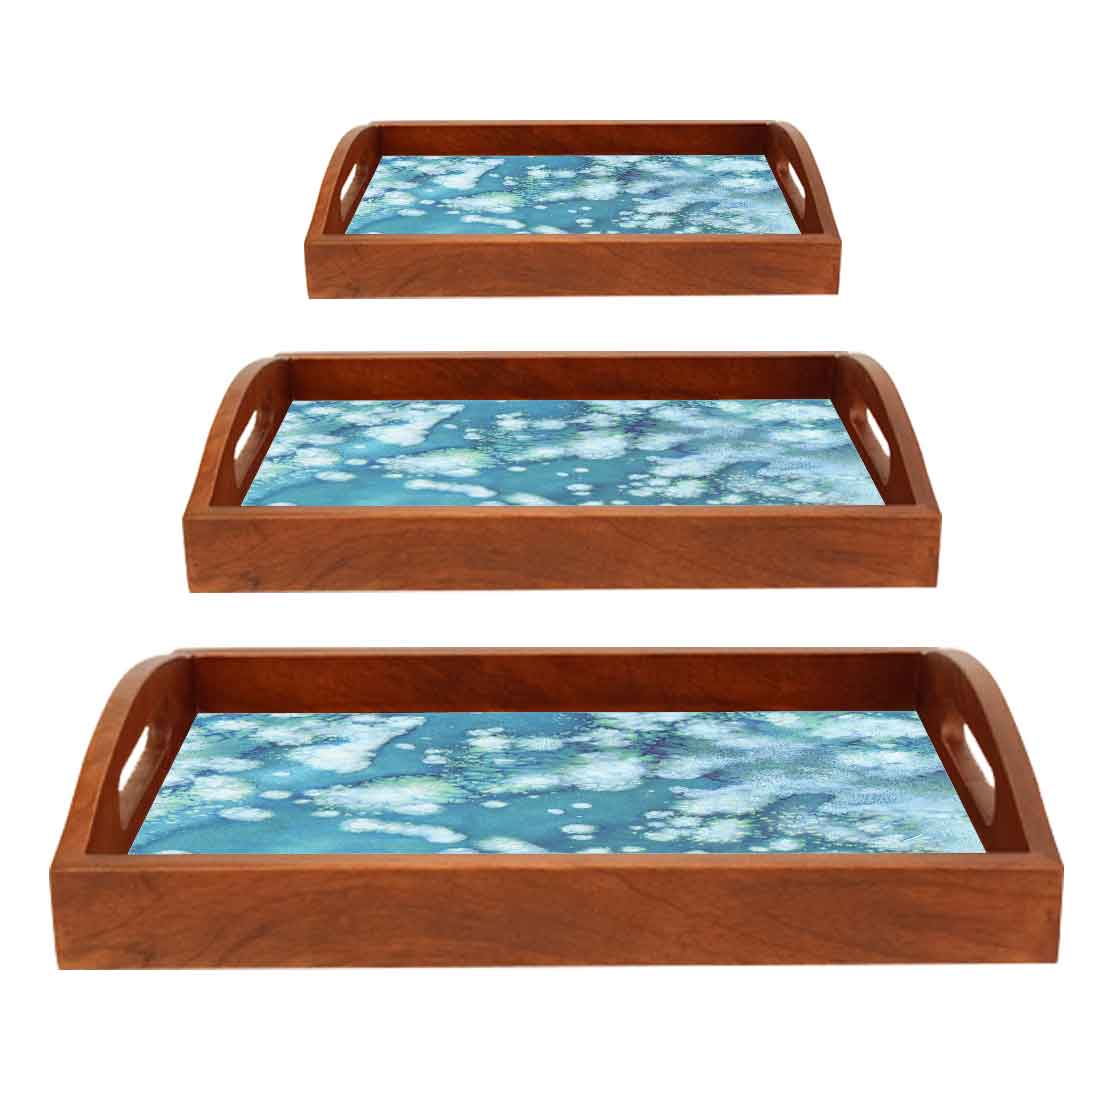 Wooden Coffee Table Trays for Serving Snacks Breakfast Set of 3